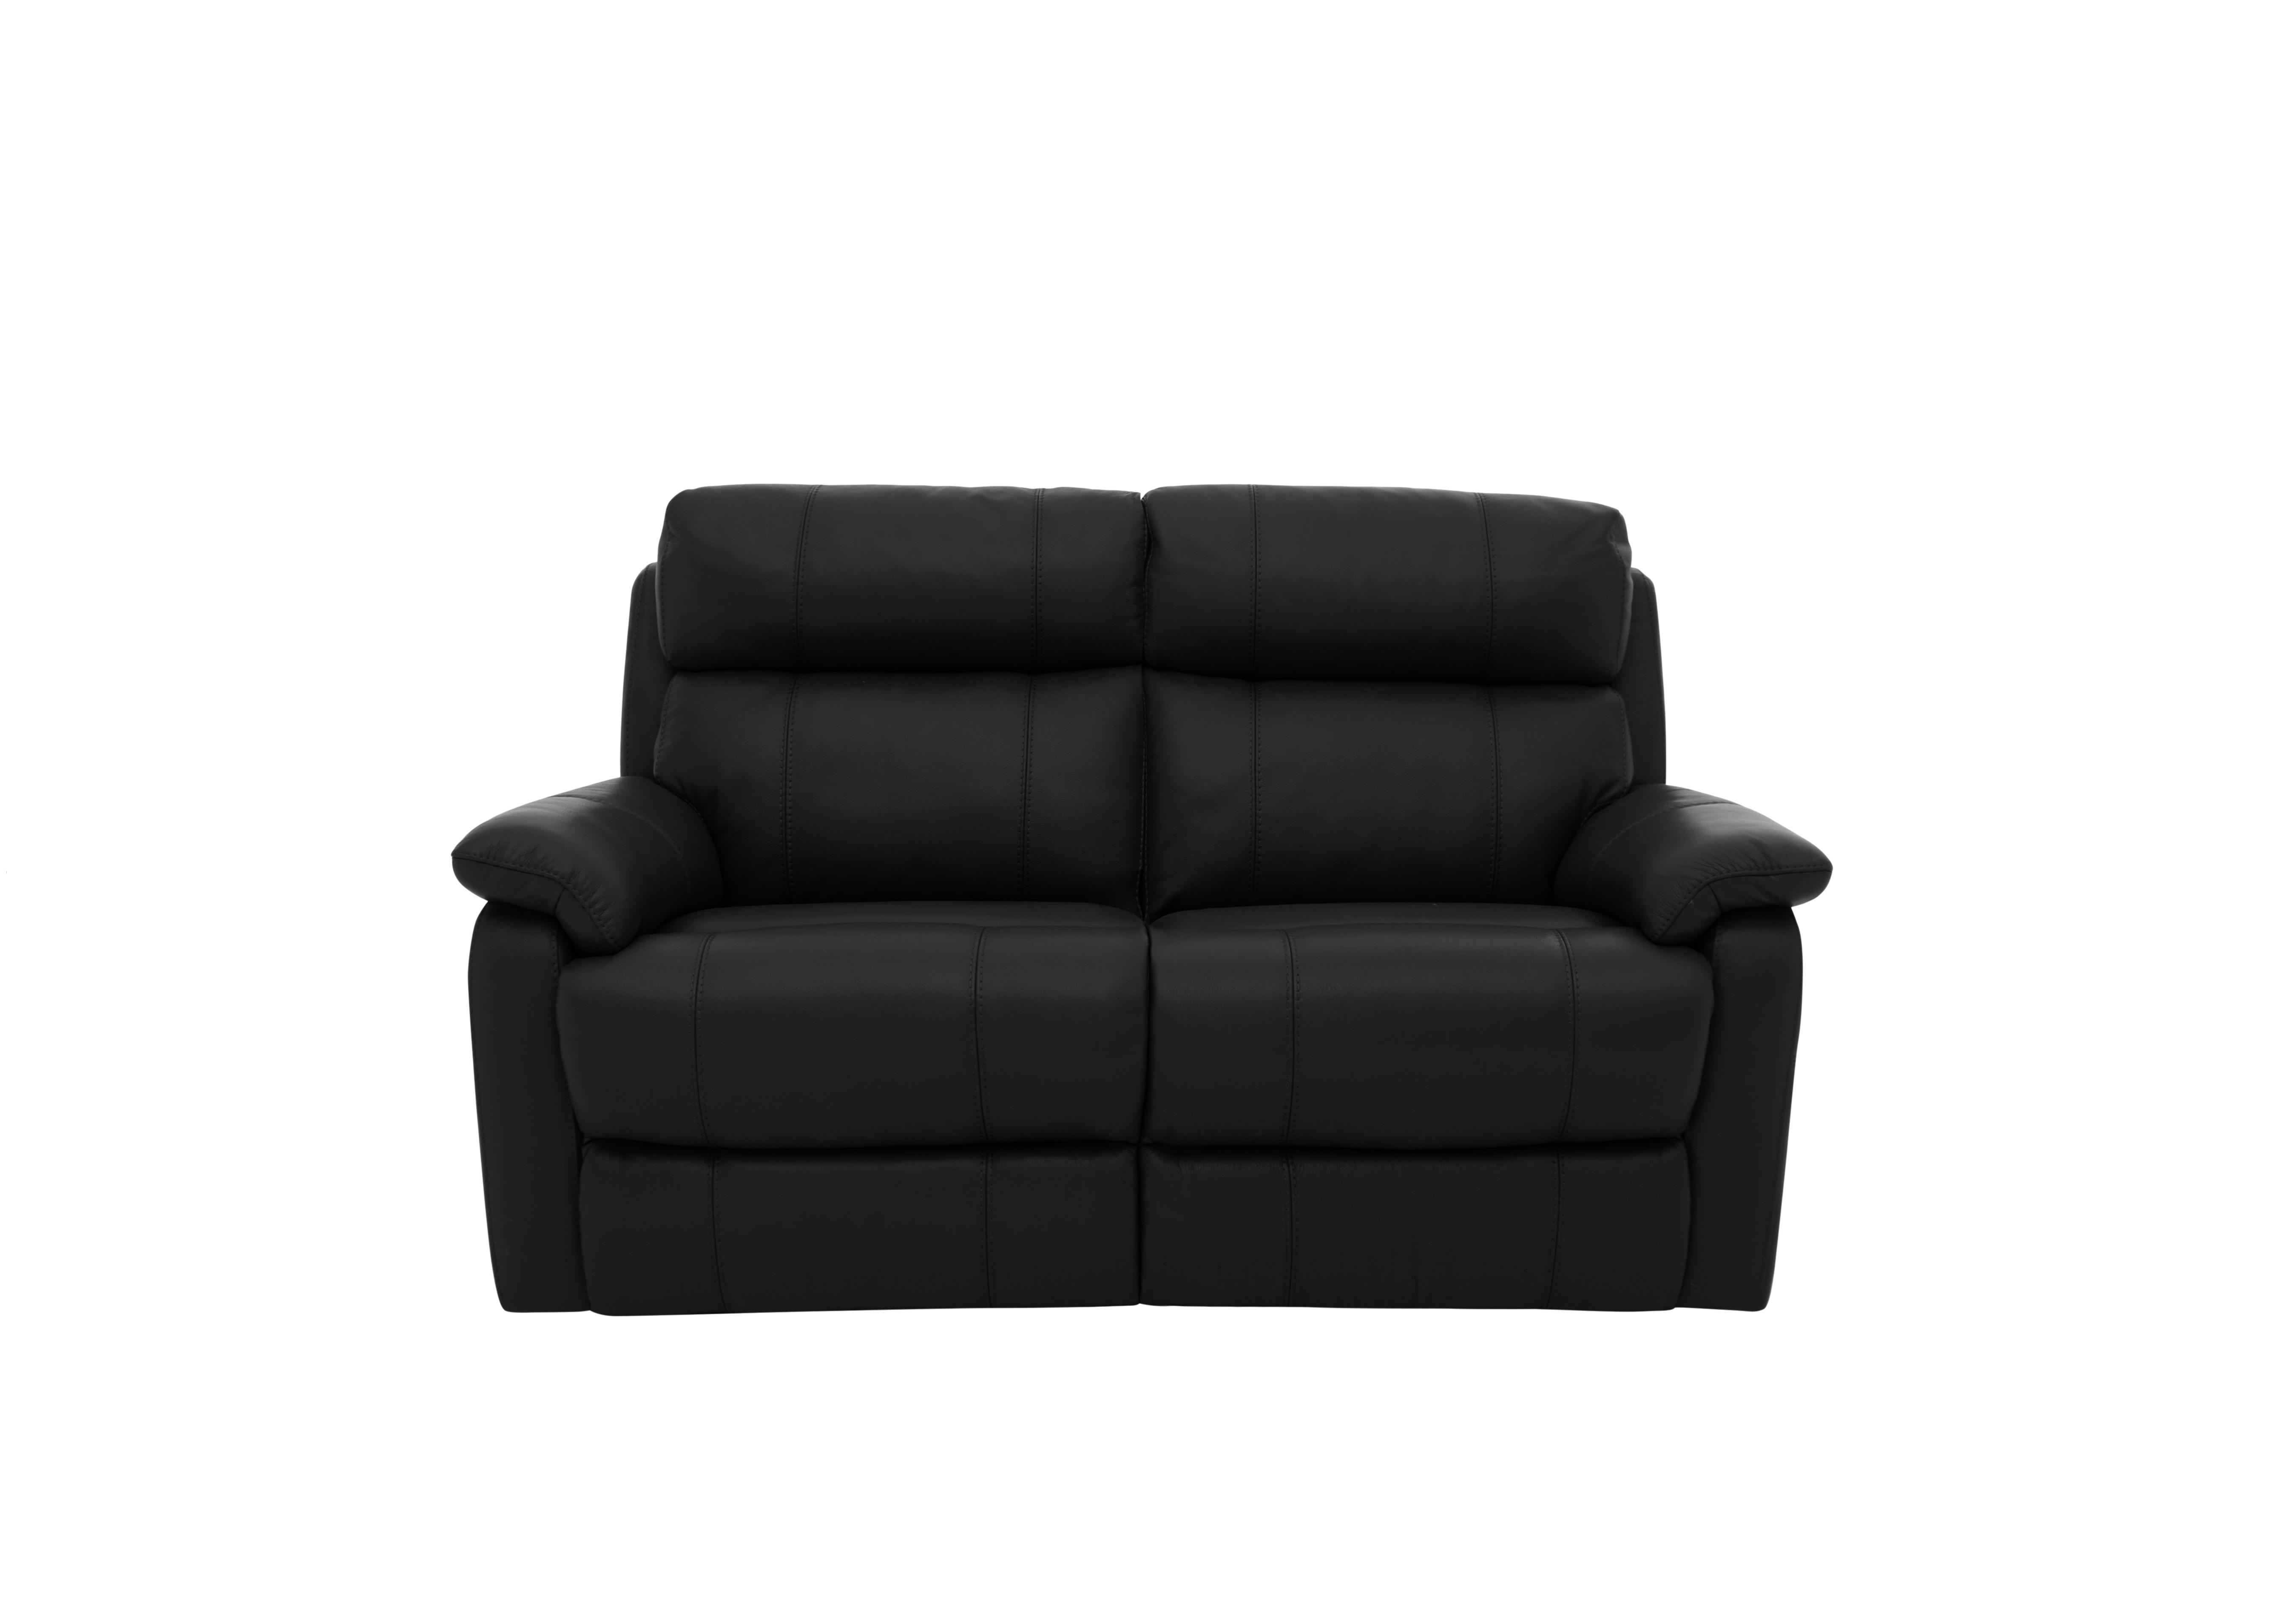 Relax Station Komodo 2 Seater Power Leather Sofa in Bv-3500 Classic Black on Furniture Village